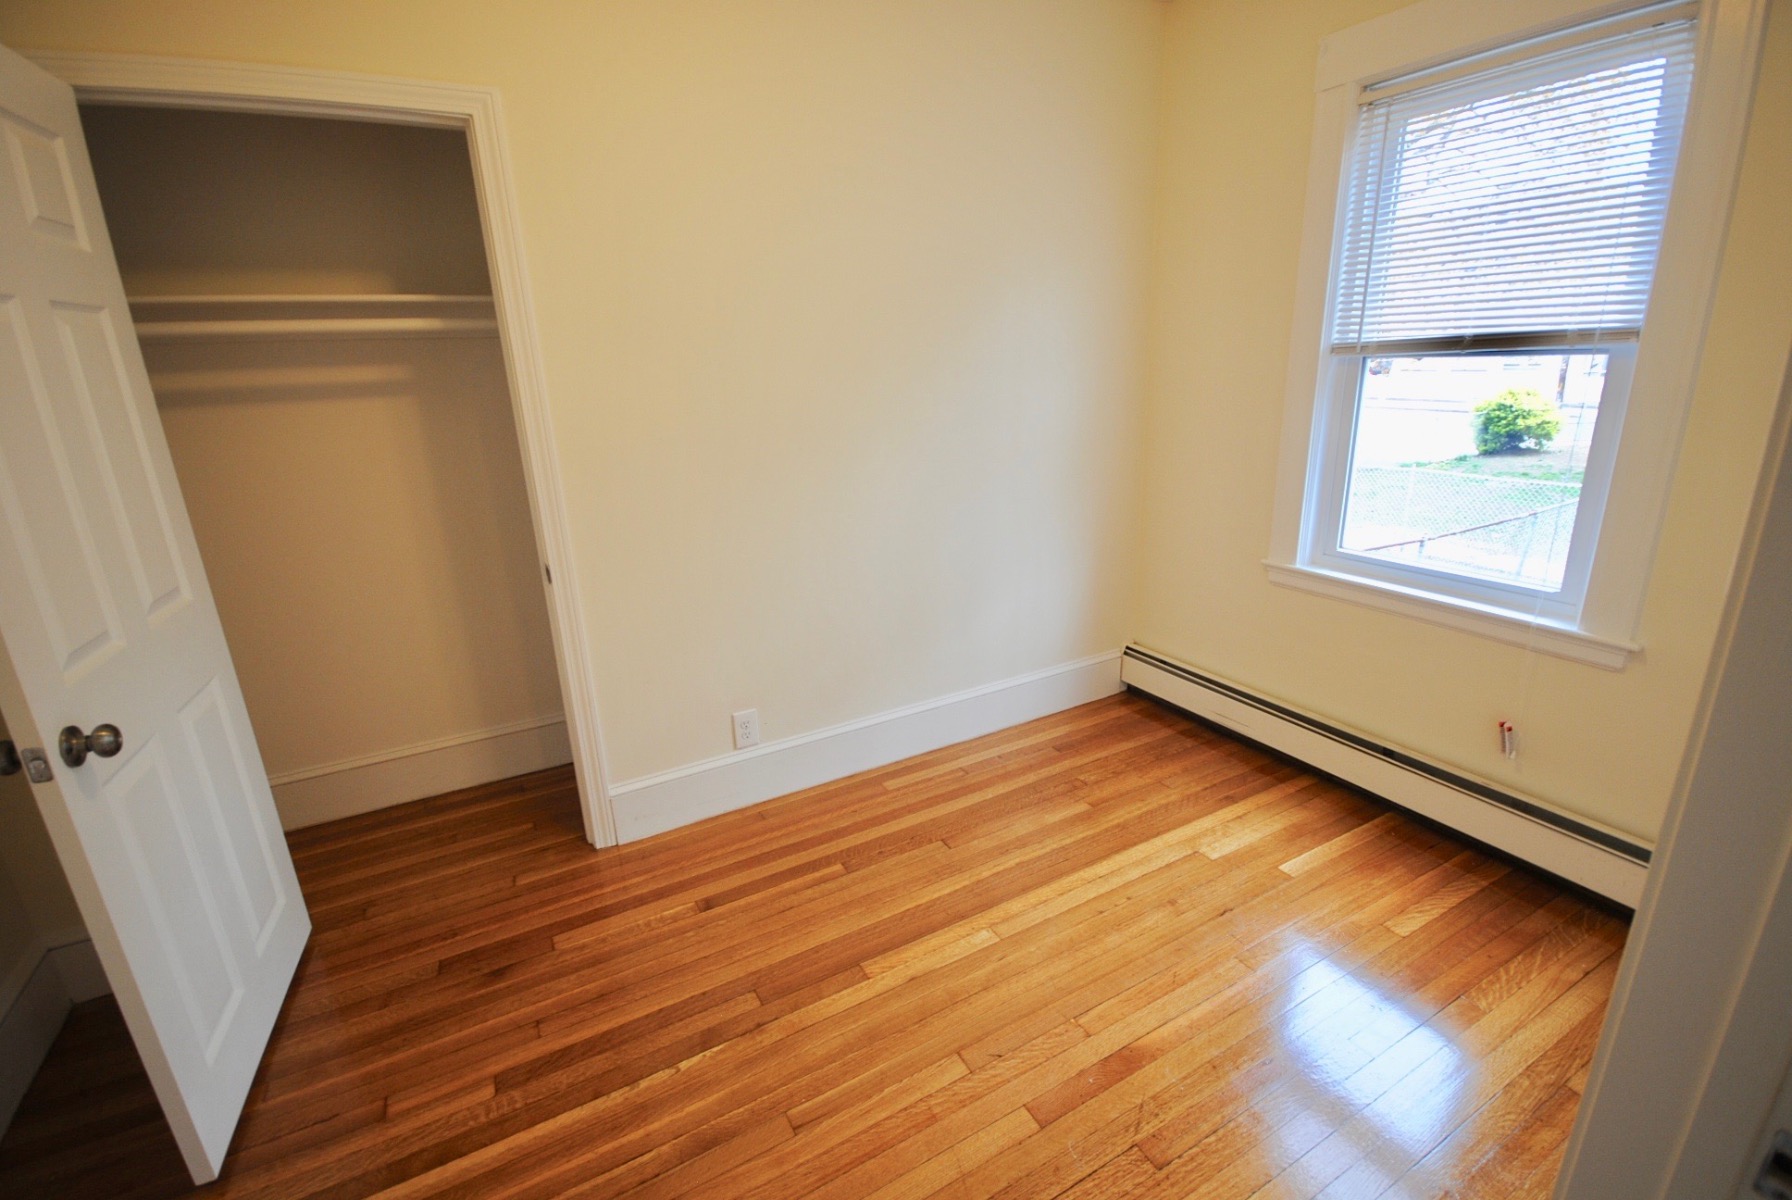 Photos of apartment on Taylor St.,Medford MA 02155